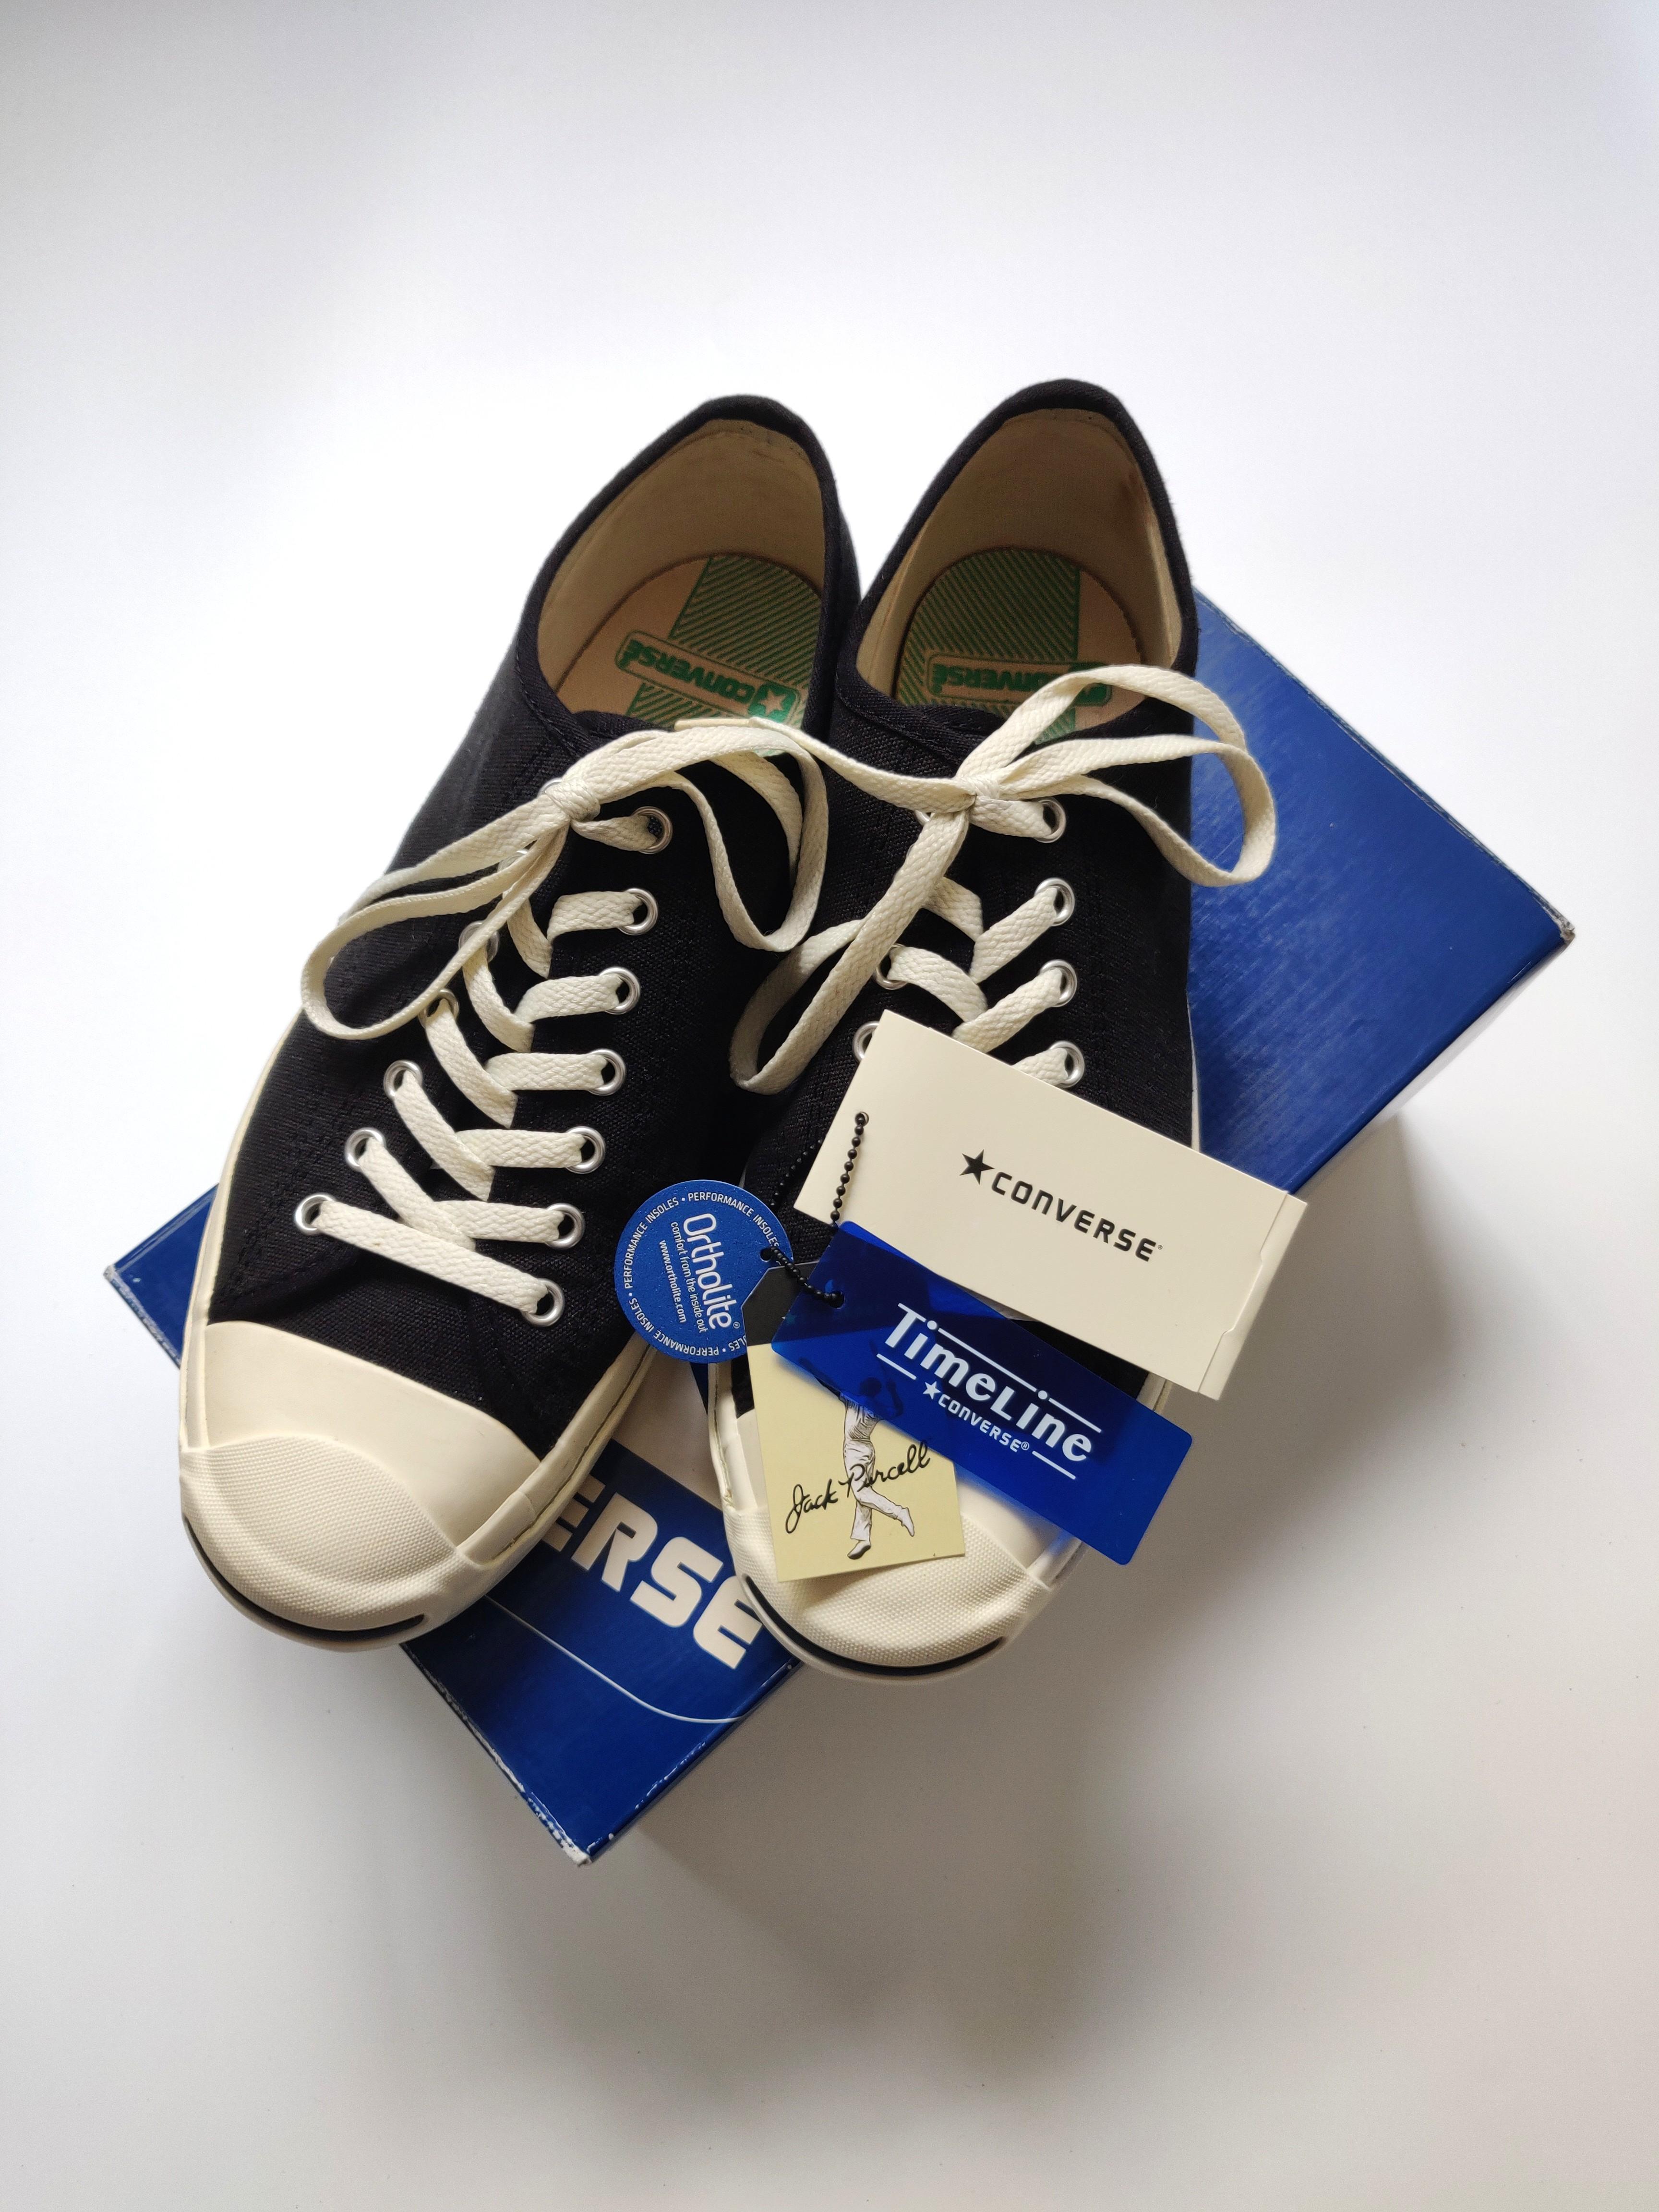 converse jack purcell 80's timeline